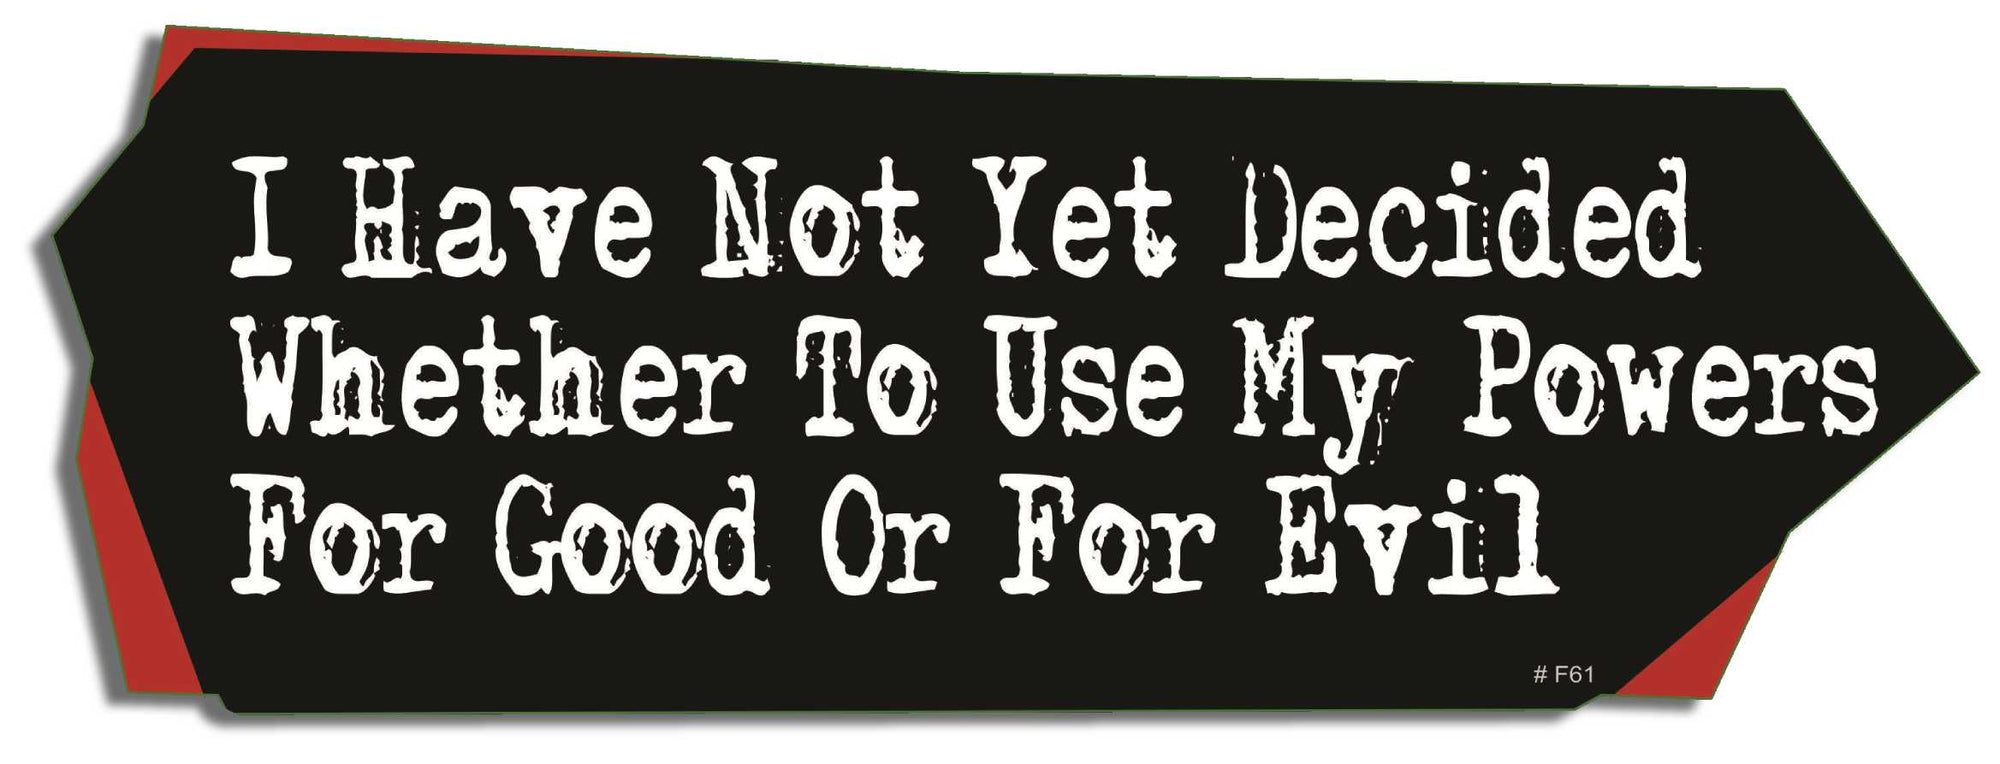 I have not yet decided whether to use my powers for good or for evil - 3" x 10" Bumper Sticker- -  Decal Bumper Sticker-funny Bumper Sticker Car Magnet I have not yet decided whether to-  Decal for carsDark and surreal